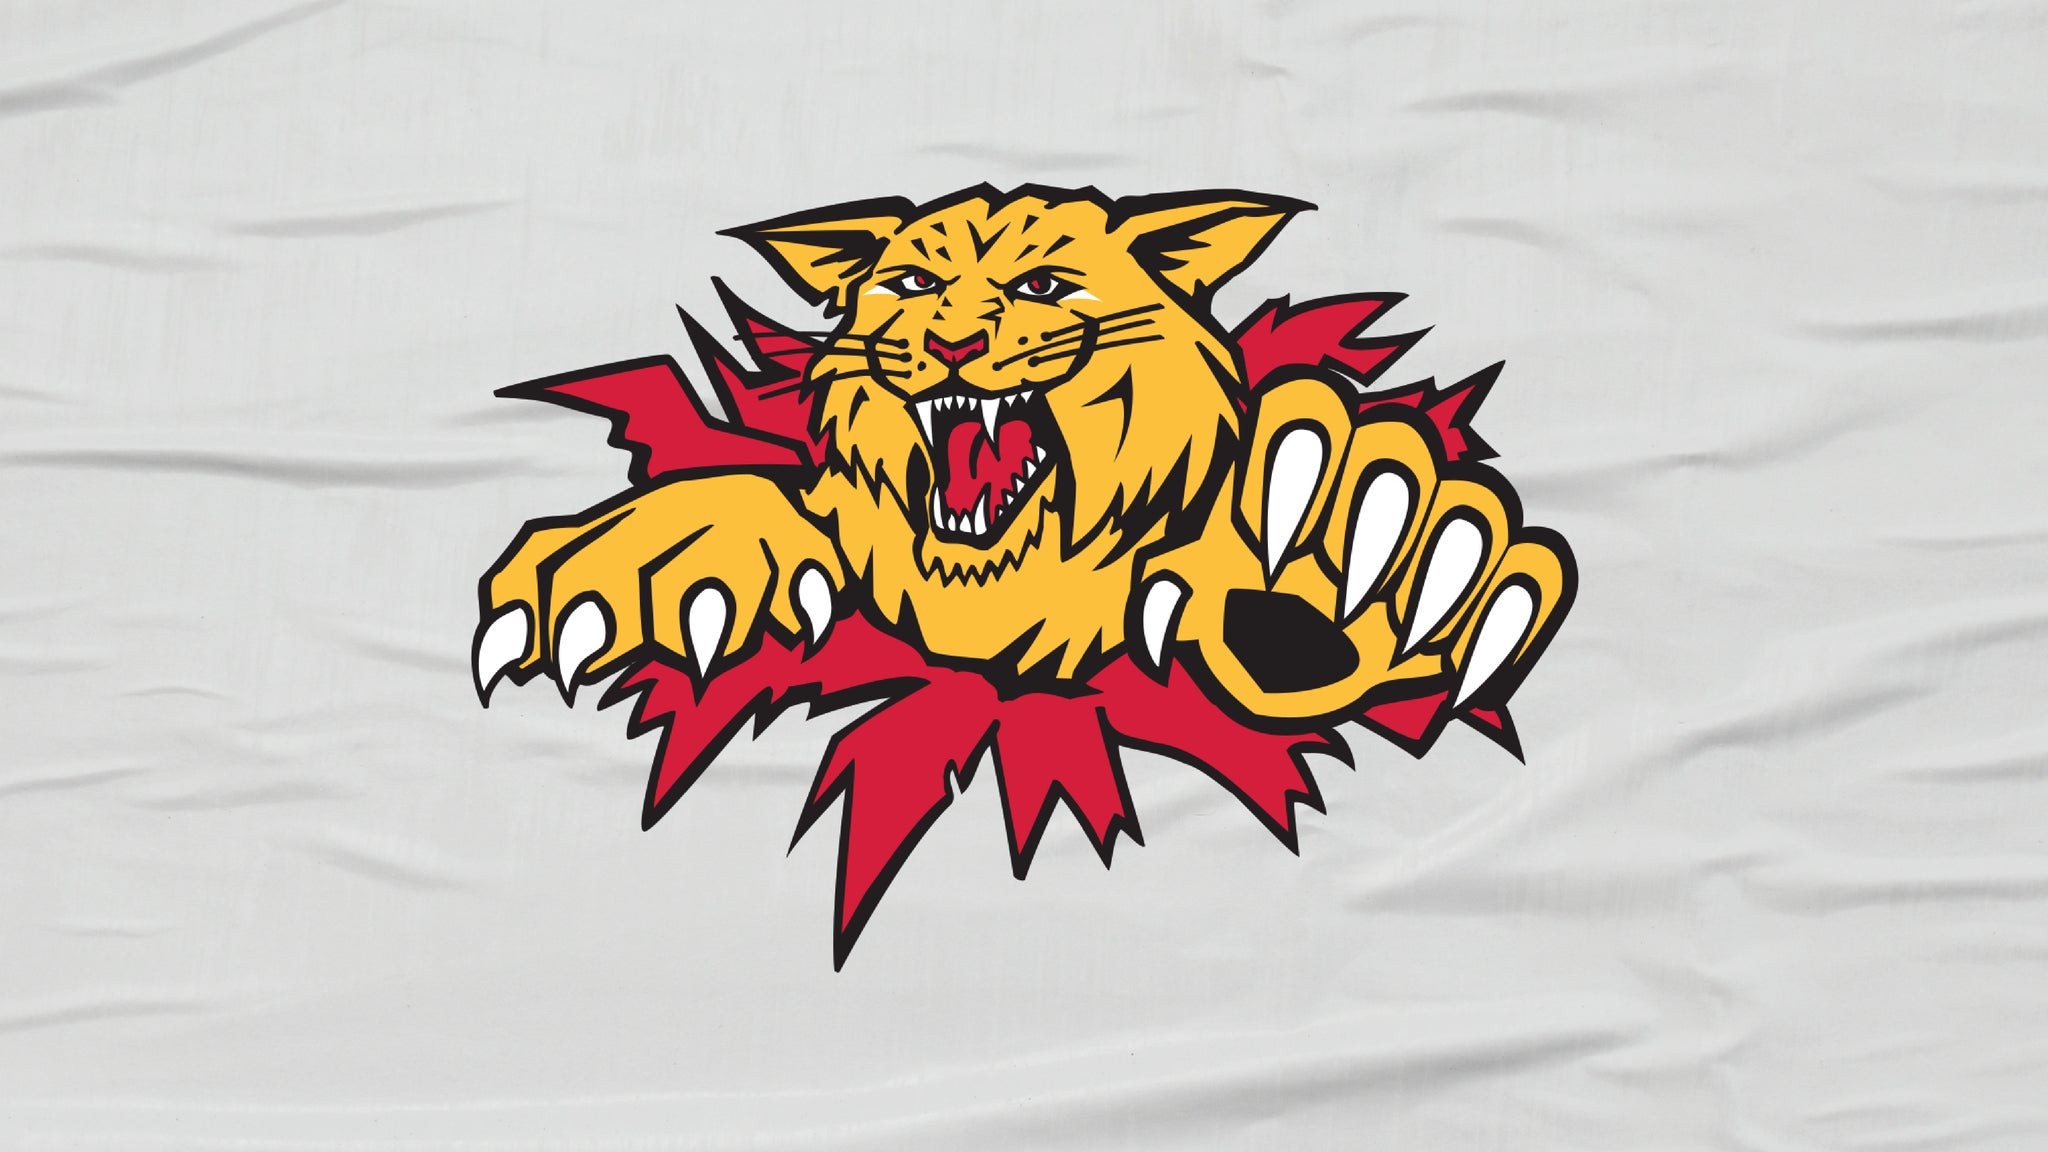 Moncton Wildcats vs. Charlottetown Islanders in Moncton promo photo for CAA Members presale offer code